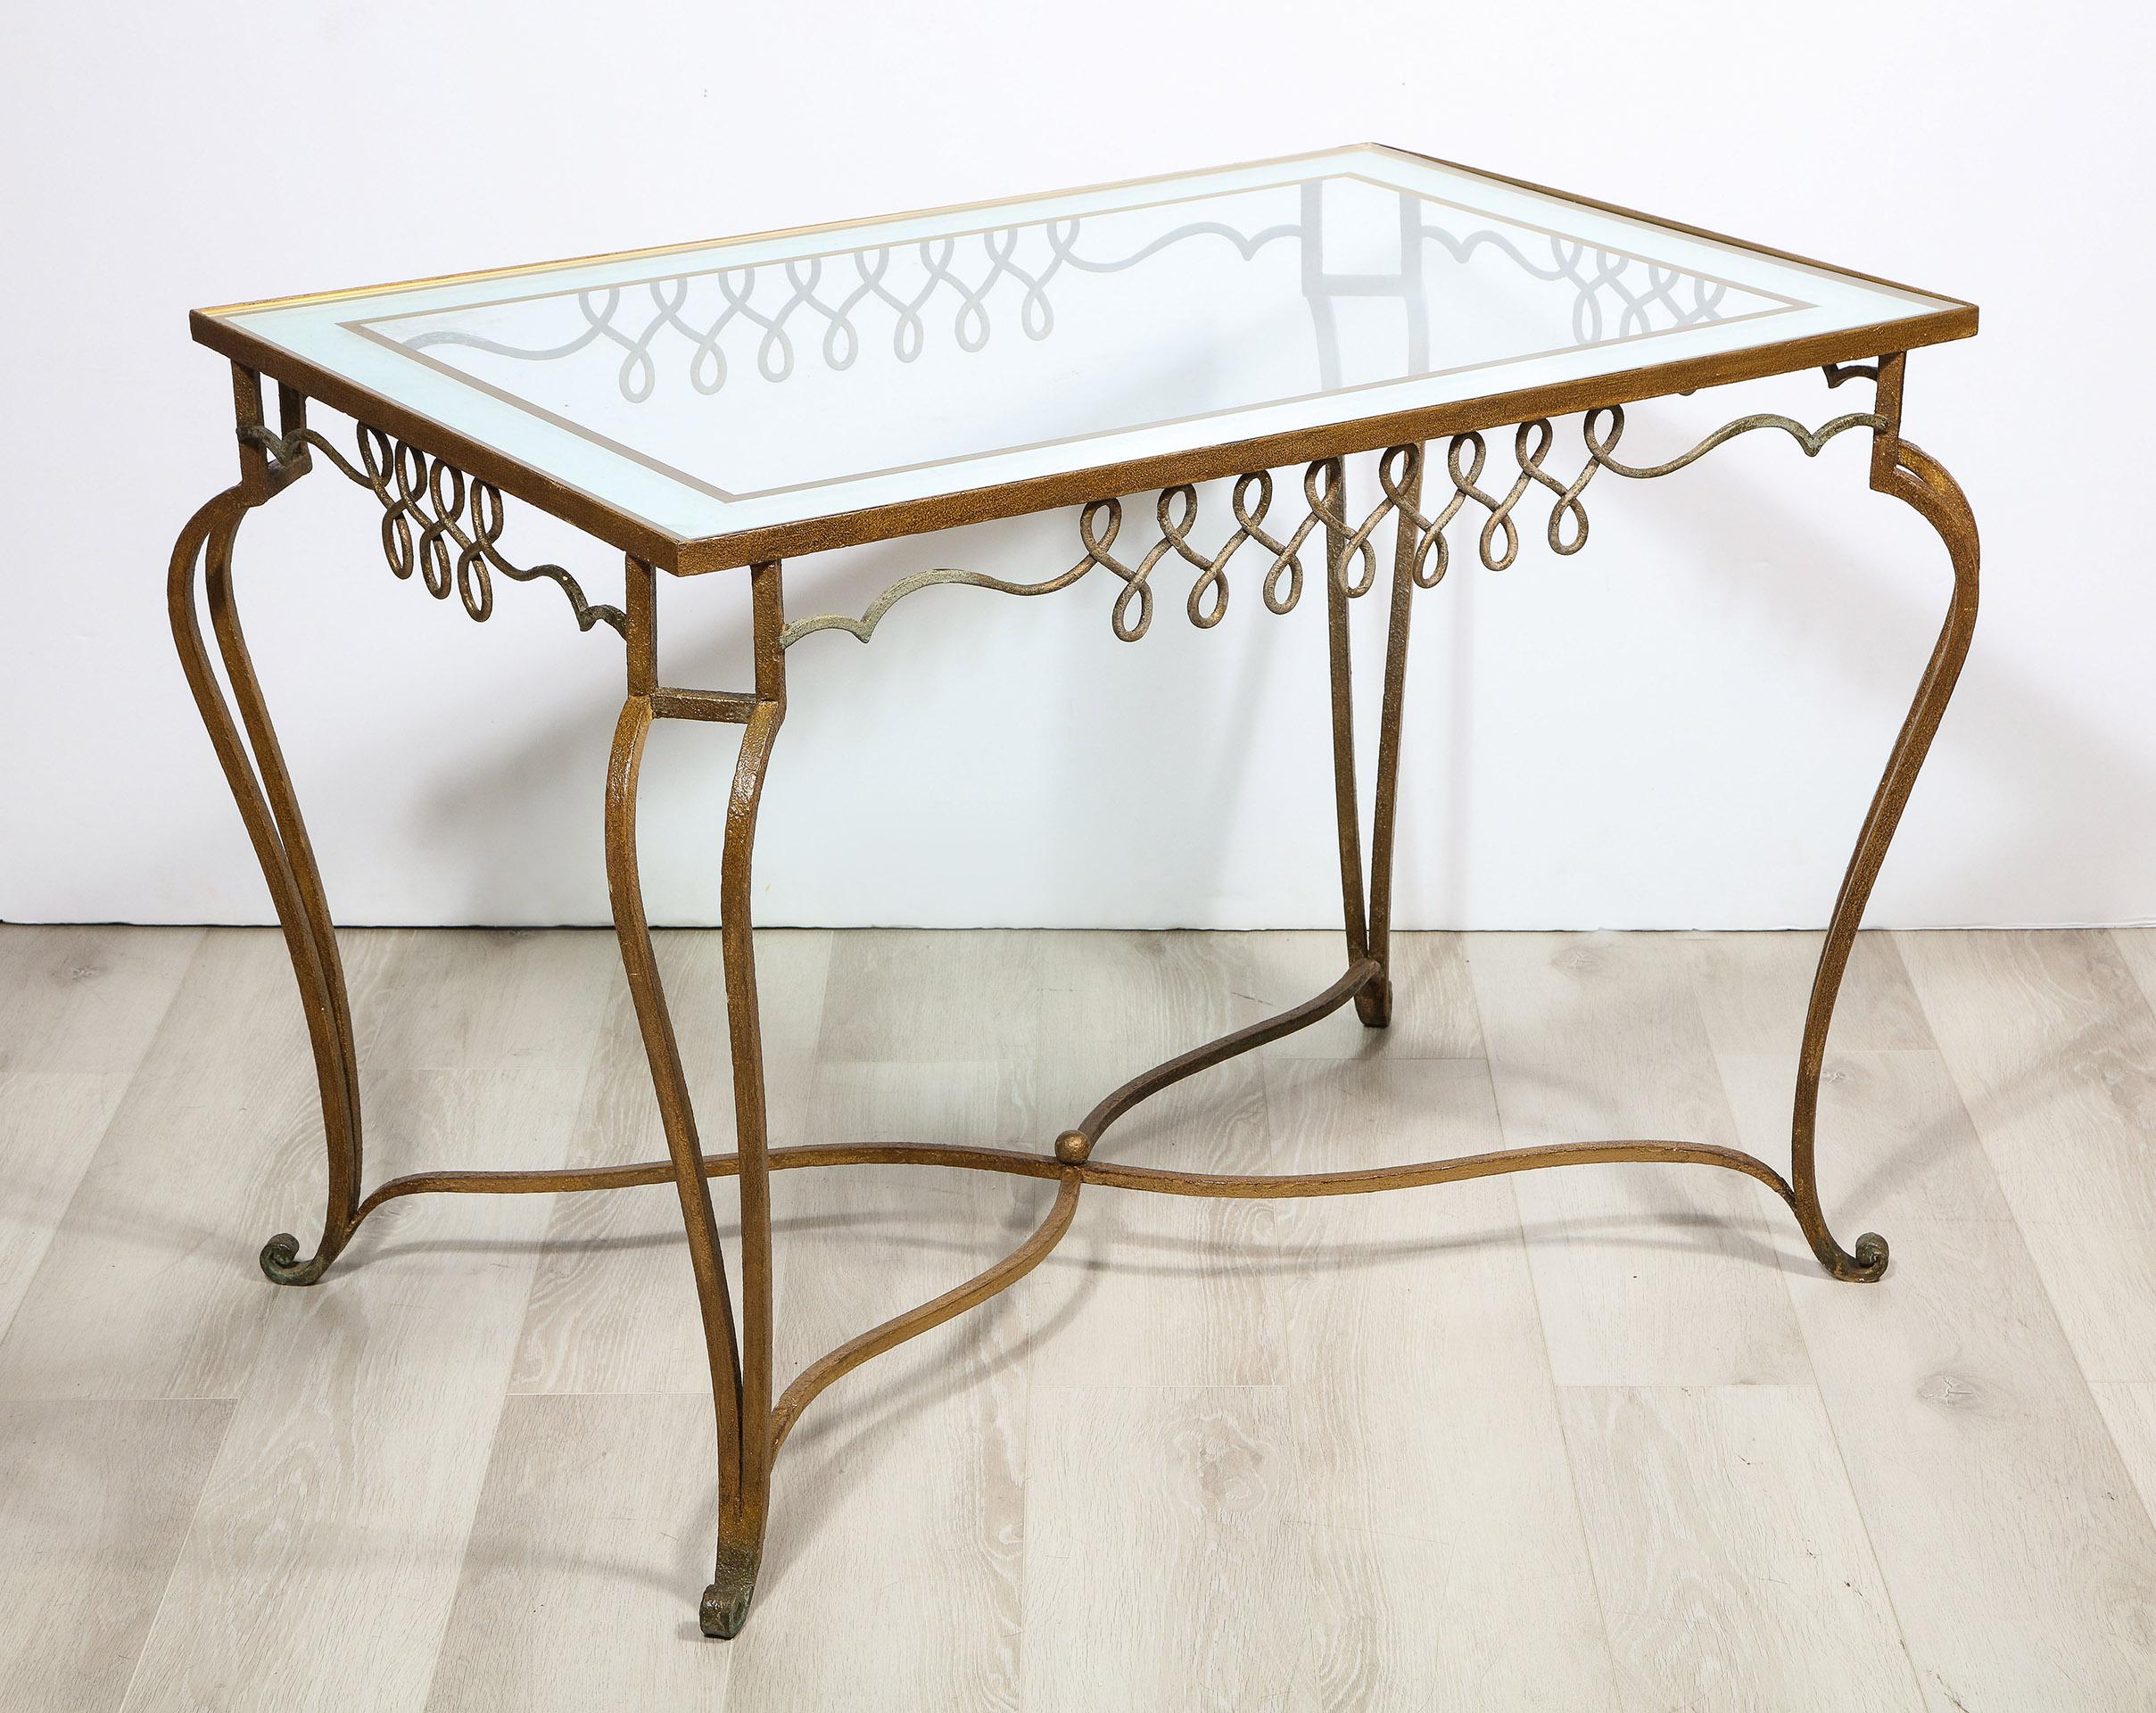 The Iron table attributed to René Prou, having an inserted glass top with framed in a mirrored and églomisé decoration supported by a finely embellished iron frieze with a scroll form legs at each corner and a central cross stretcher.